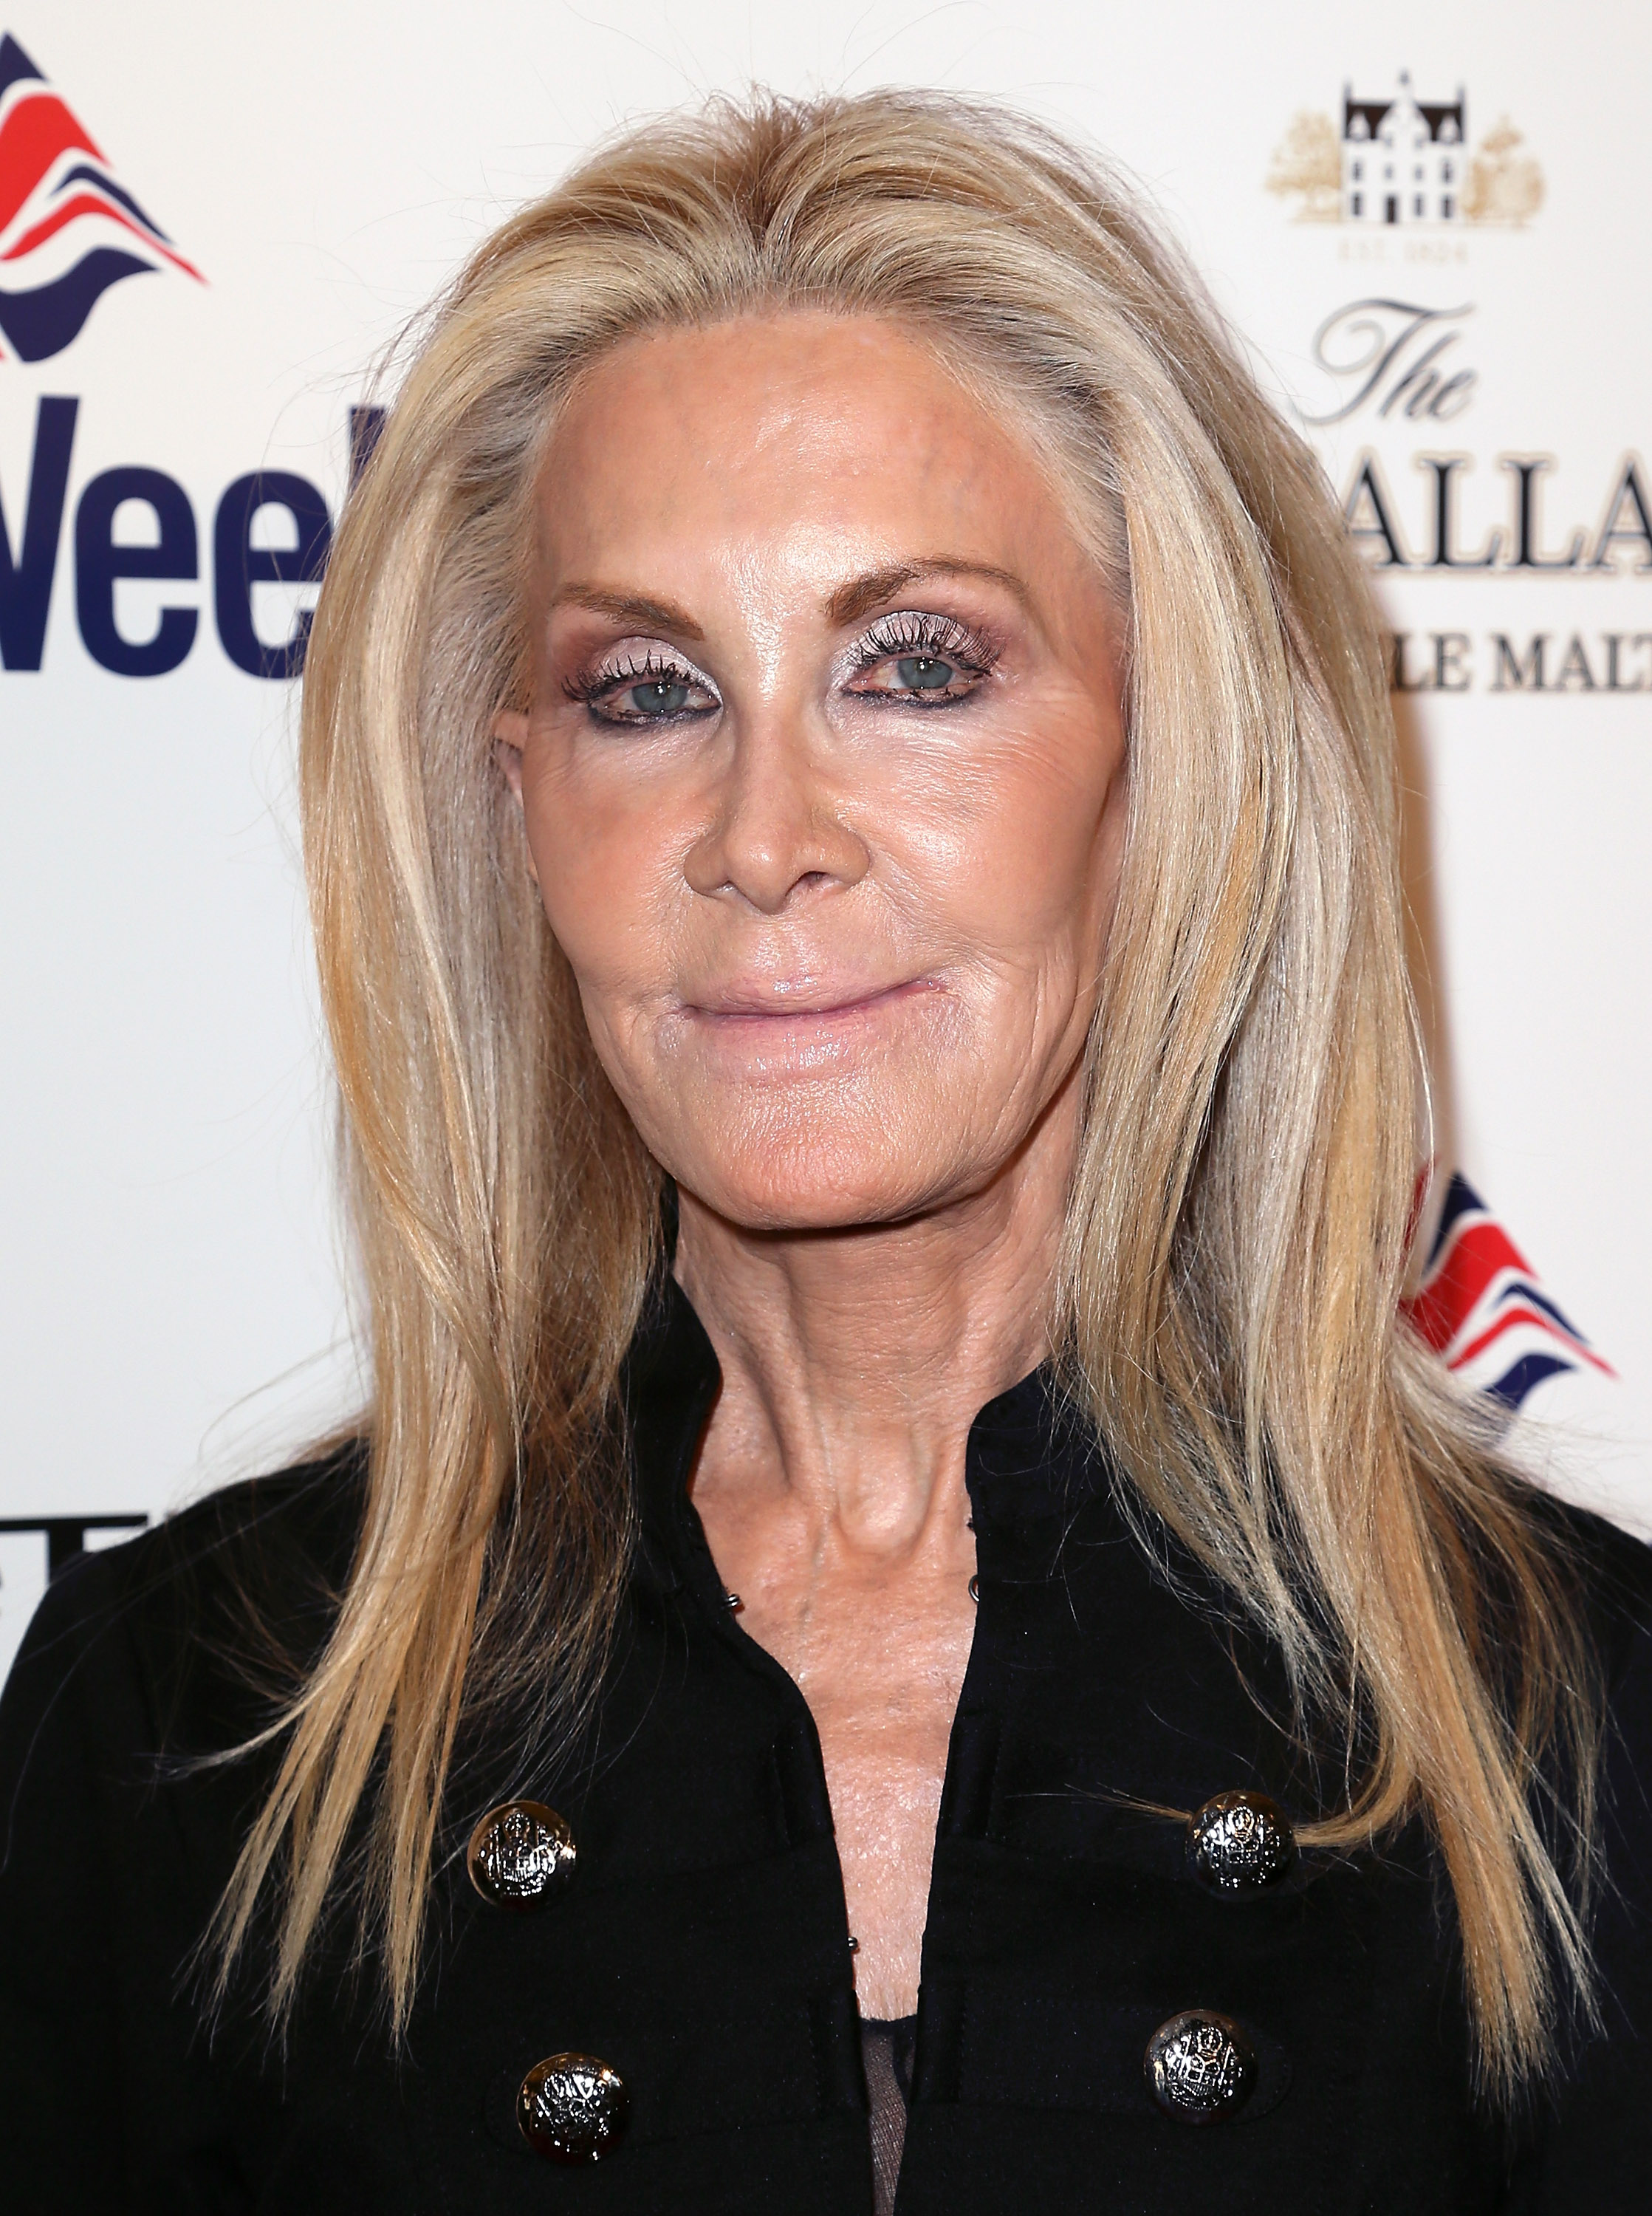 Joan Van Ark attends BritWeek's 10th Anniversary on April 23, 2016 in Beverly Hills, California. | Source: Getty Images